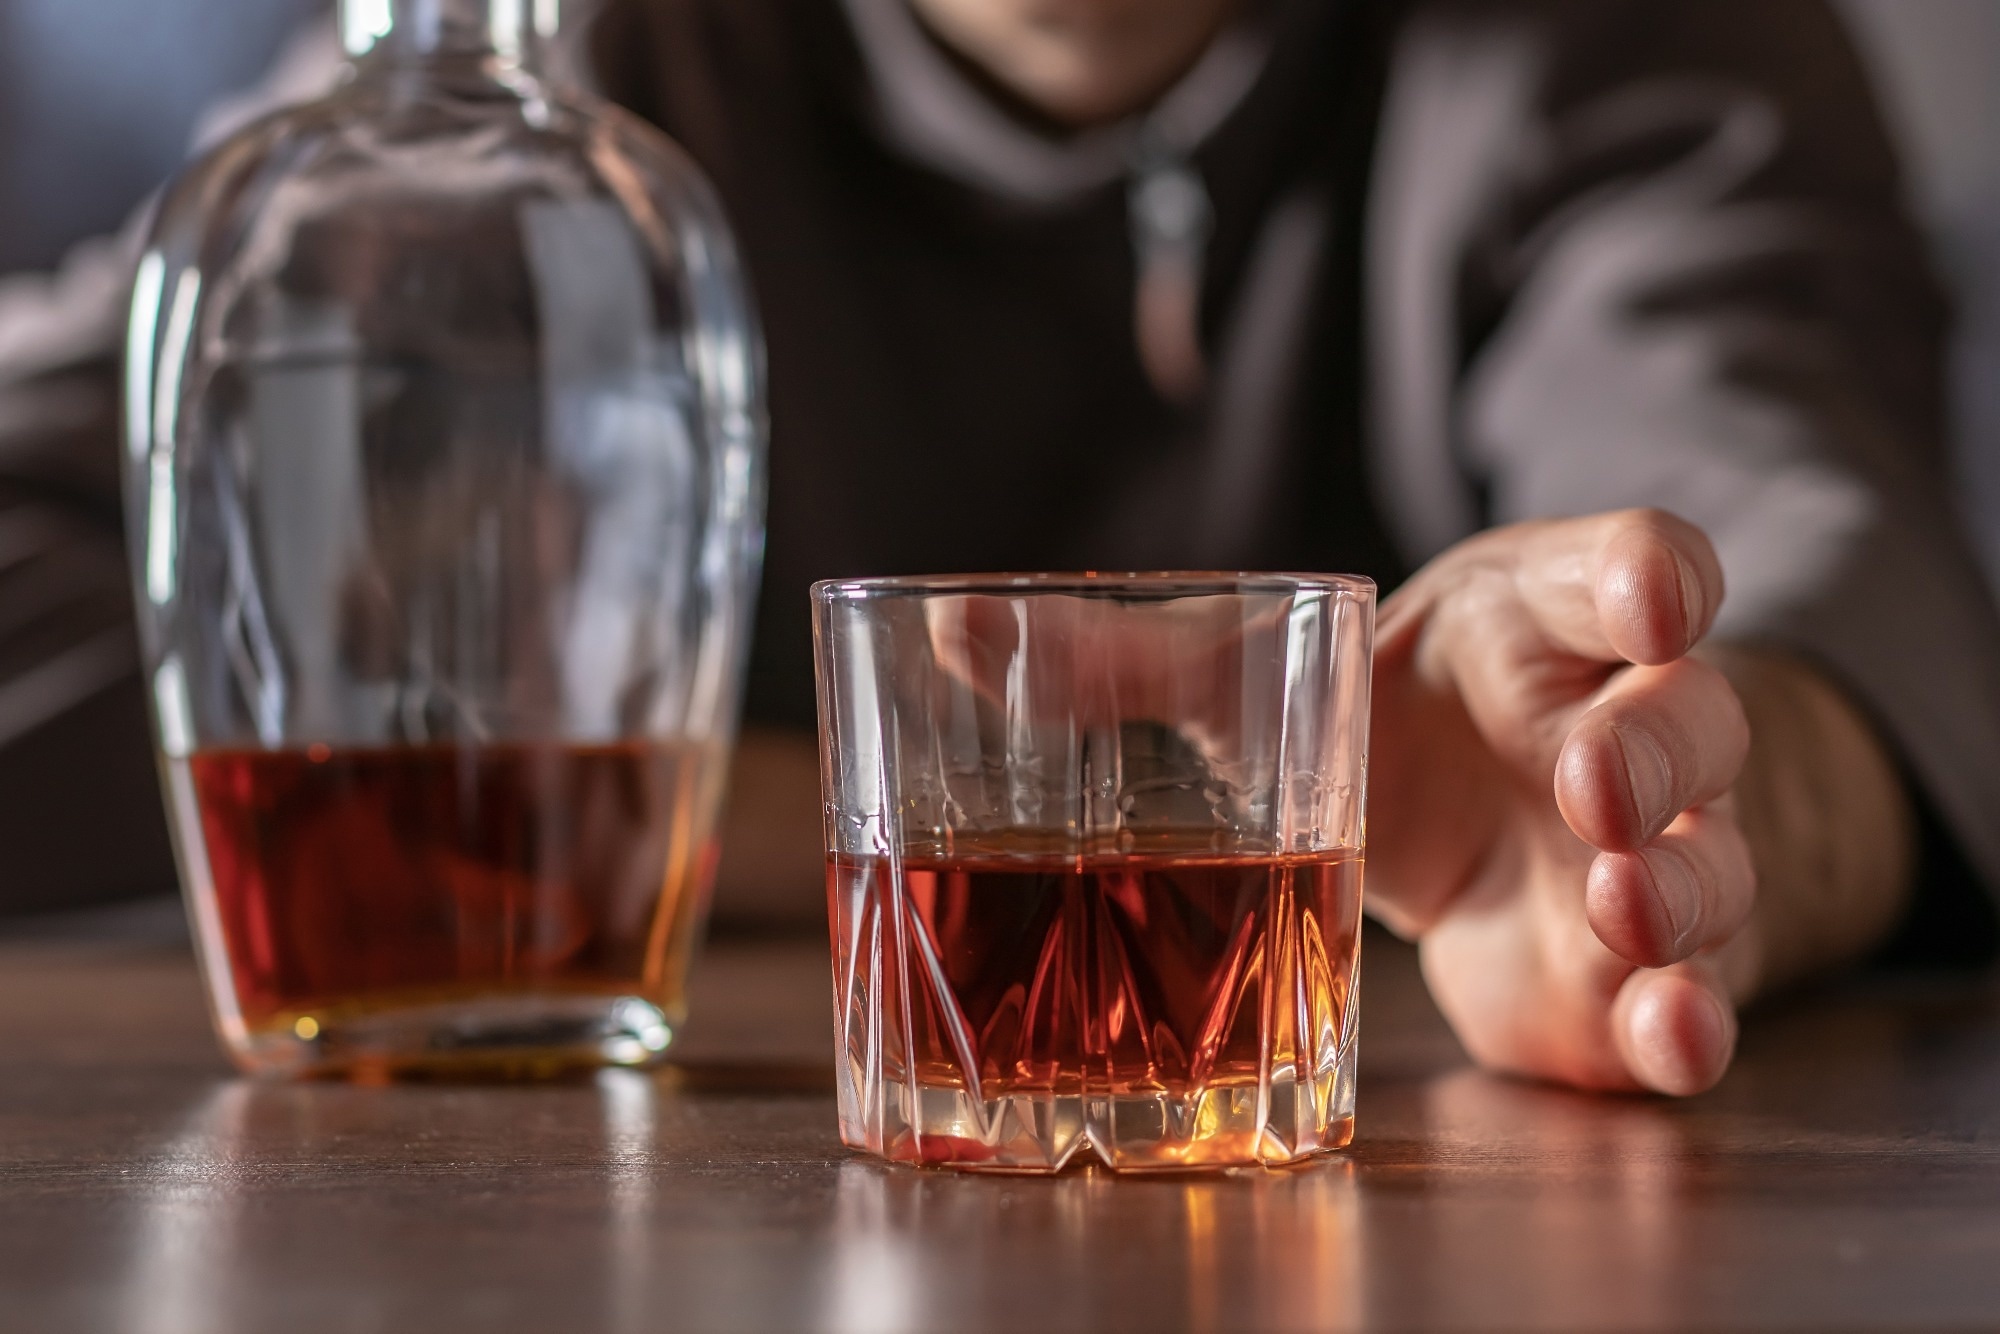 Study: Semaglutide and Tirzepatide reduce alcohol consumption in individuals with obesity. Image Credit: Skrypnykov Dmytro/Shutterstock.com